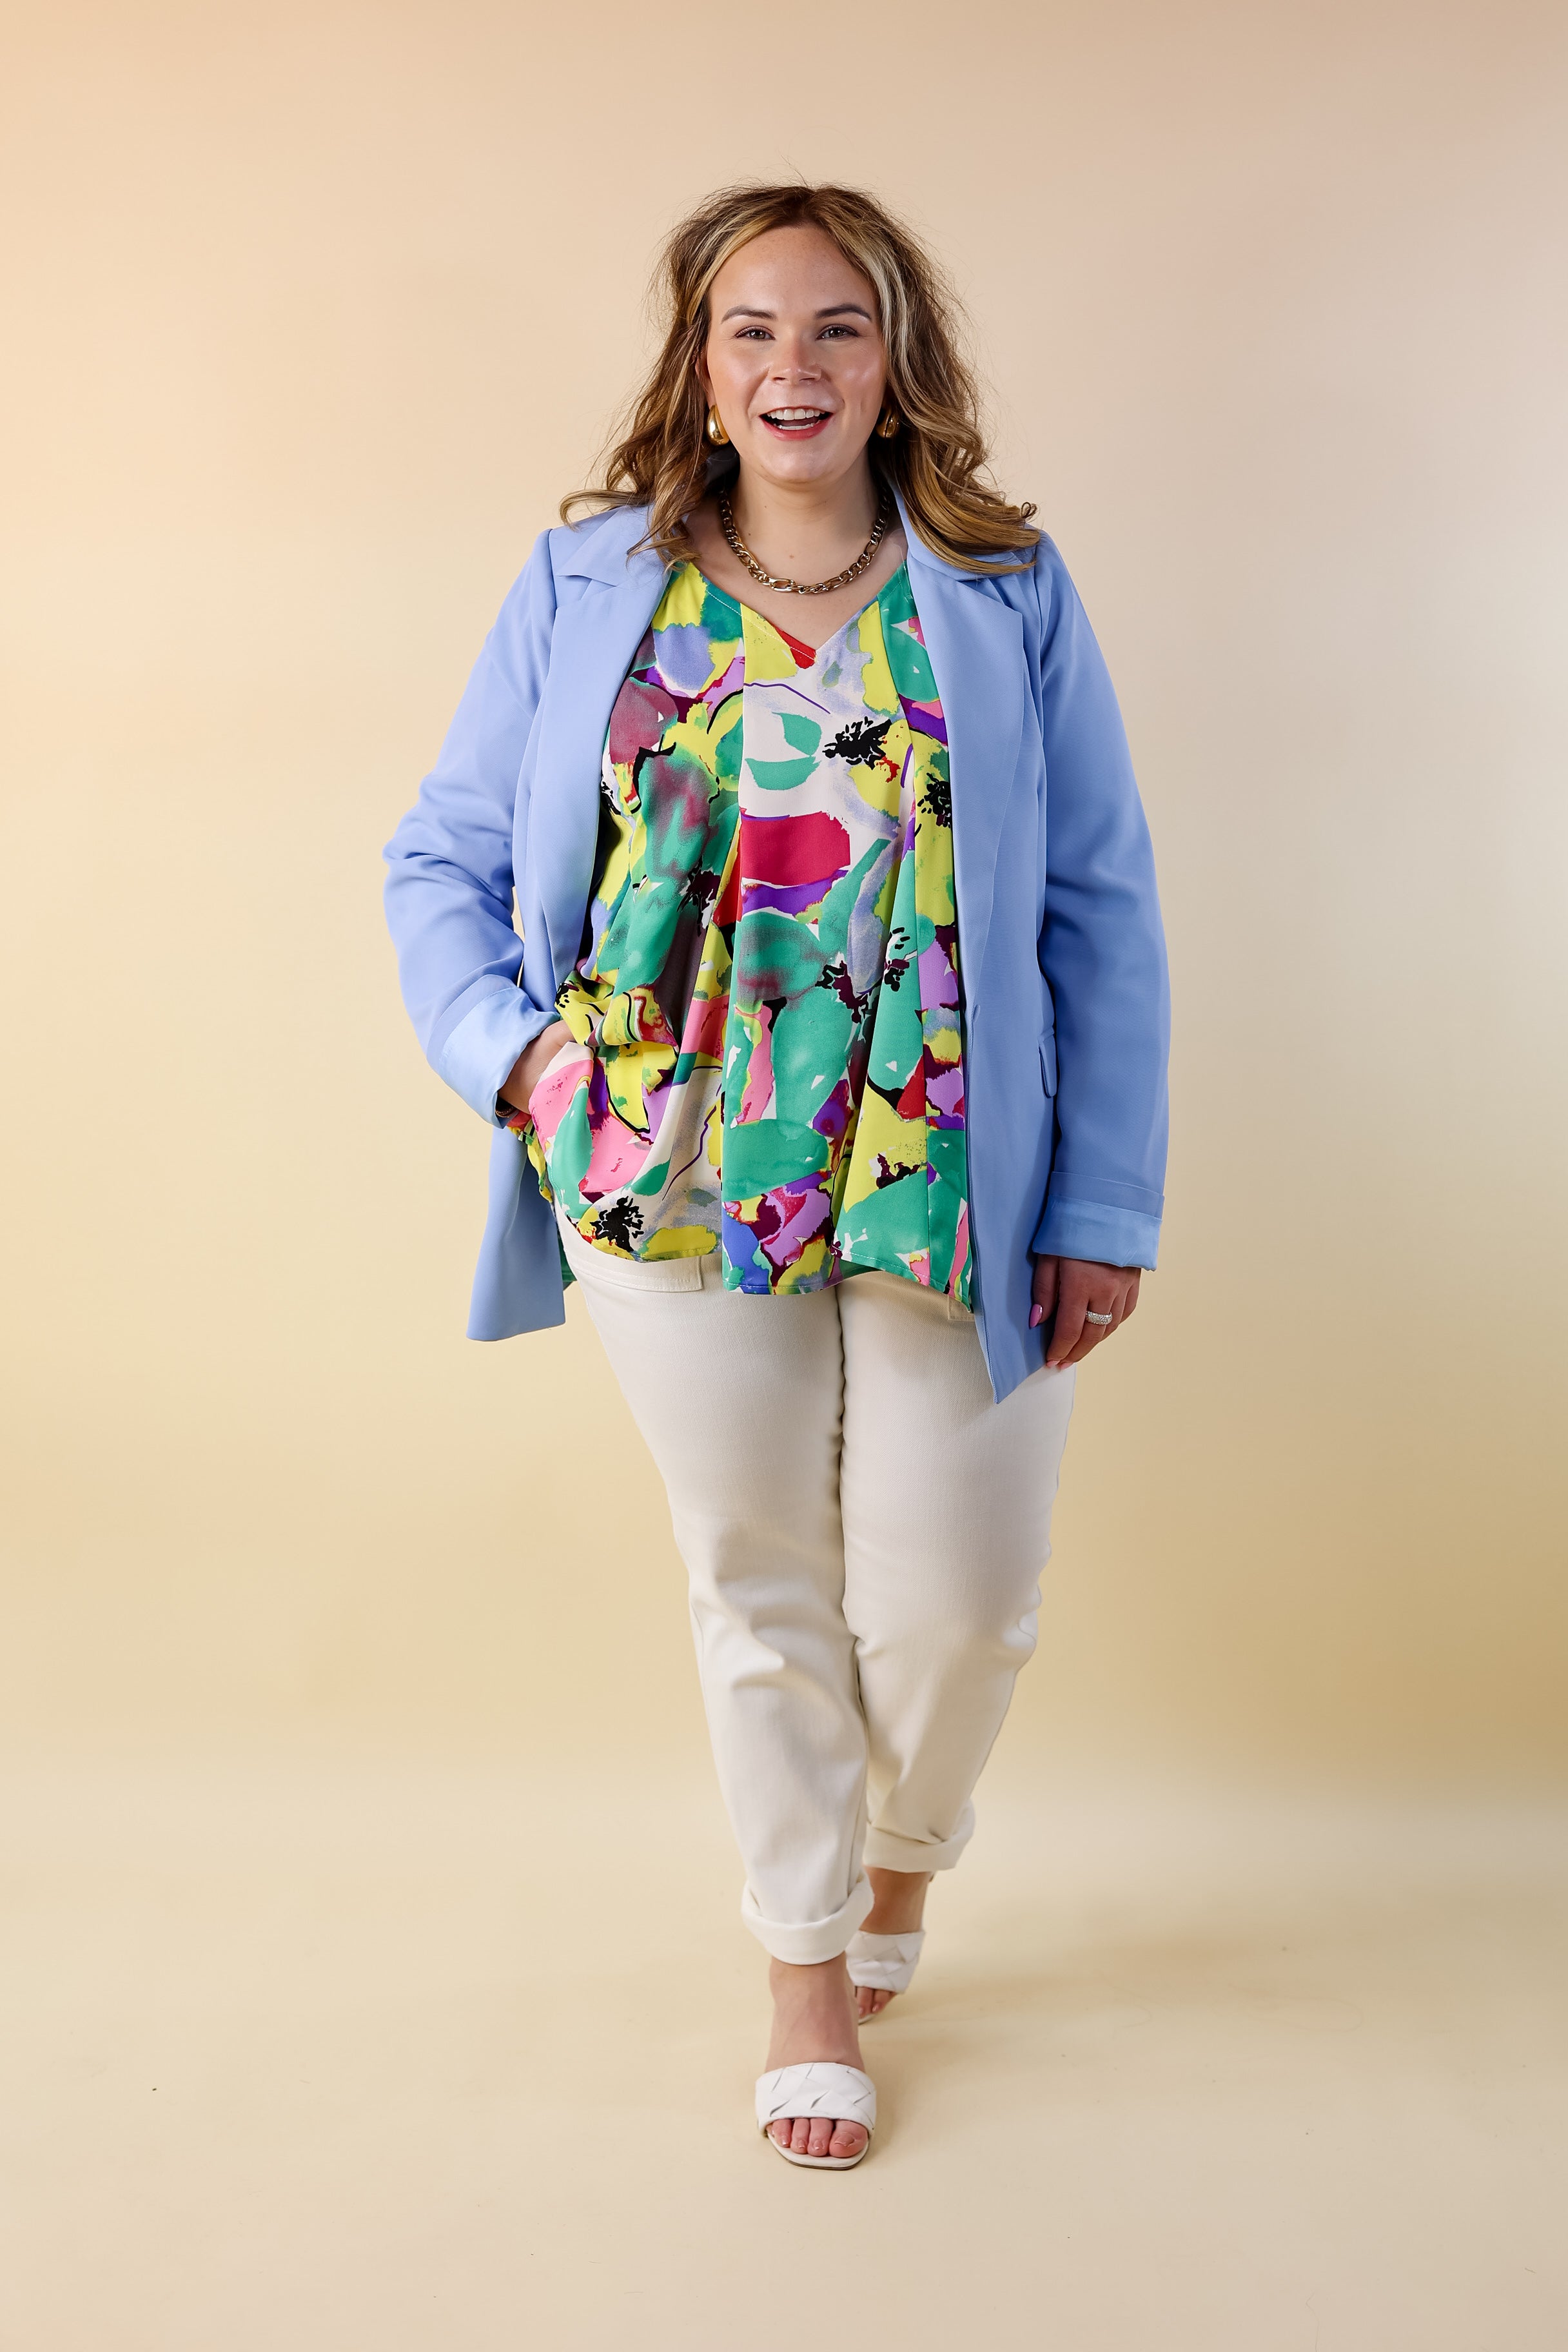 Winning Awards Long Sleeve Blazer in Periwinkle Blue - Giddy Up Glamour Boutique